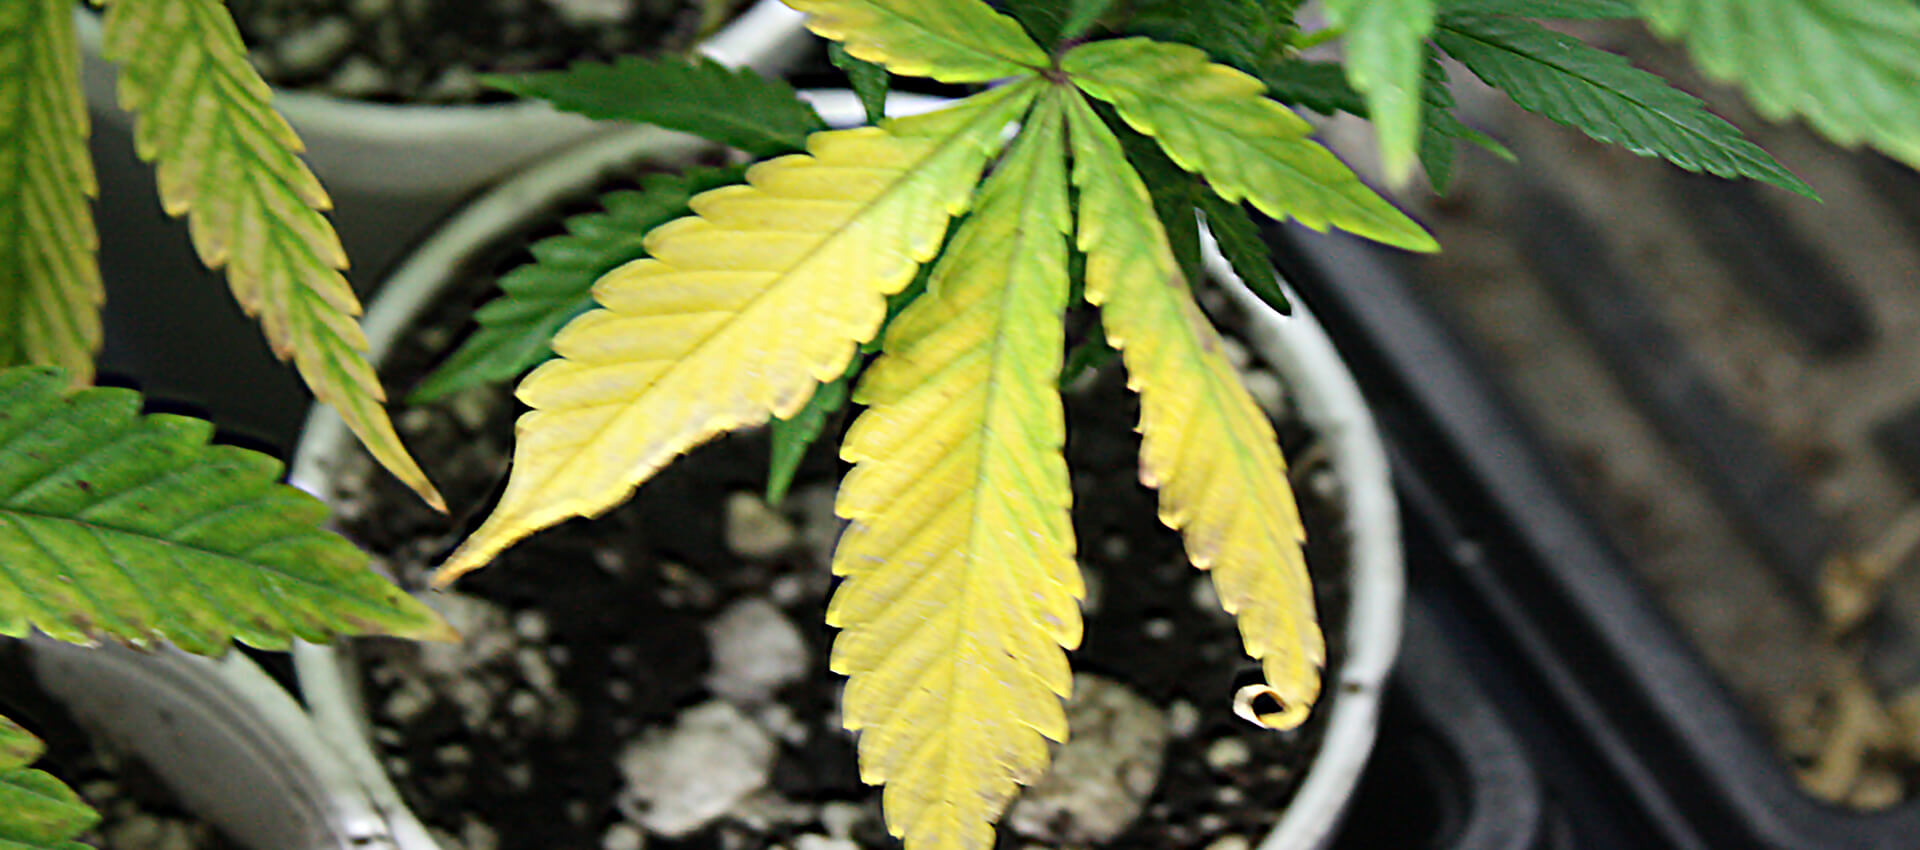 How to Diagnose Cannabis Plants with Yellow Leaves - Cafe420